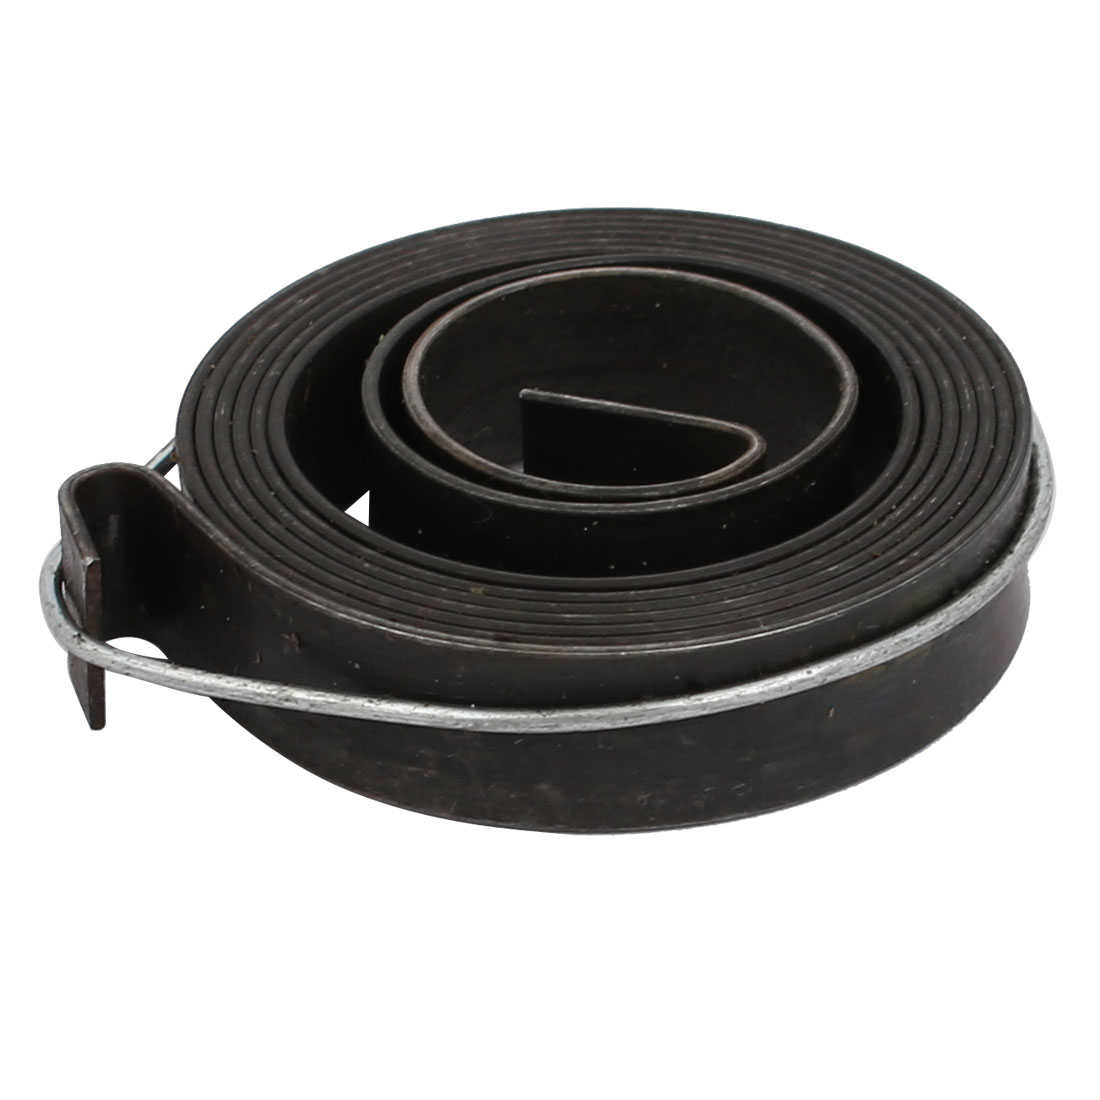 Unique Bargains 34mm Dia 8mm Width Metal Drill Press Quill Feed Belt Return Coil Spring Assembly